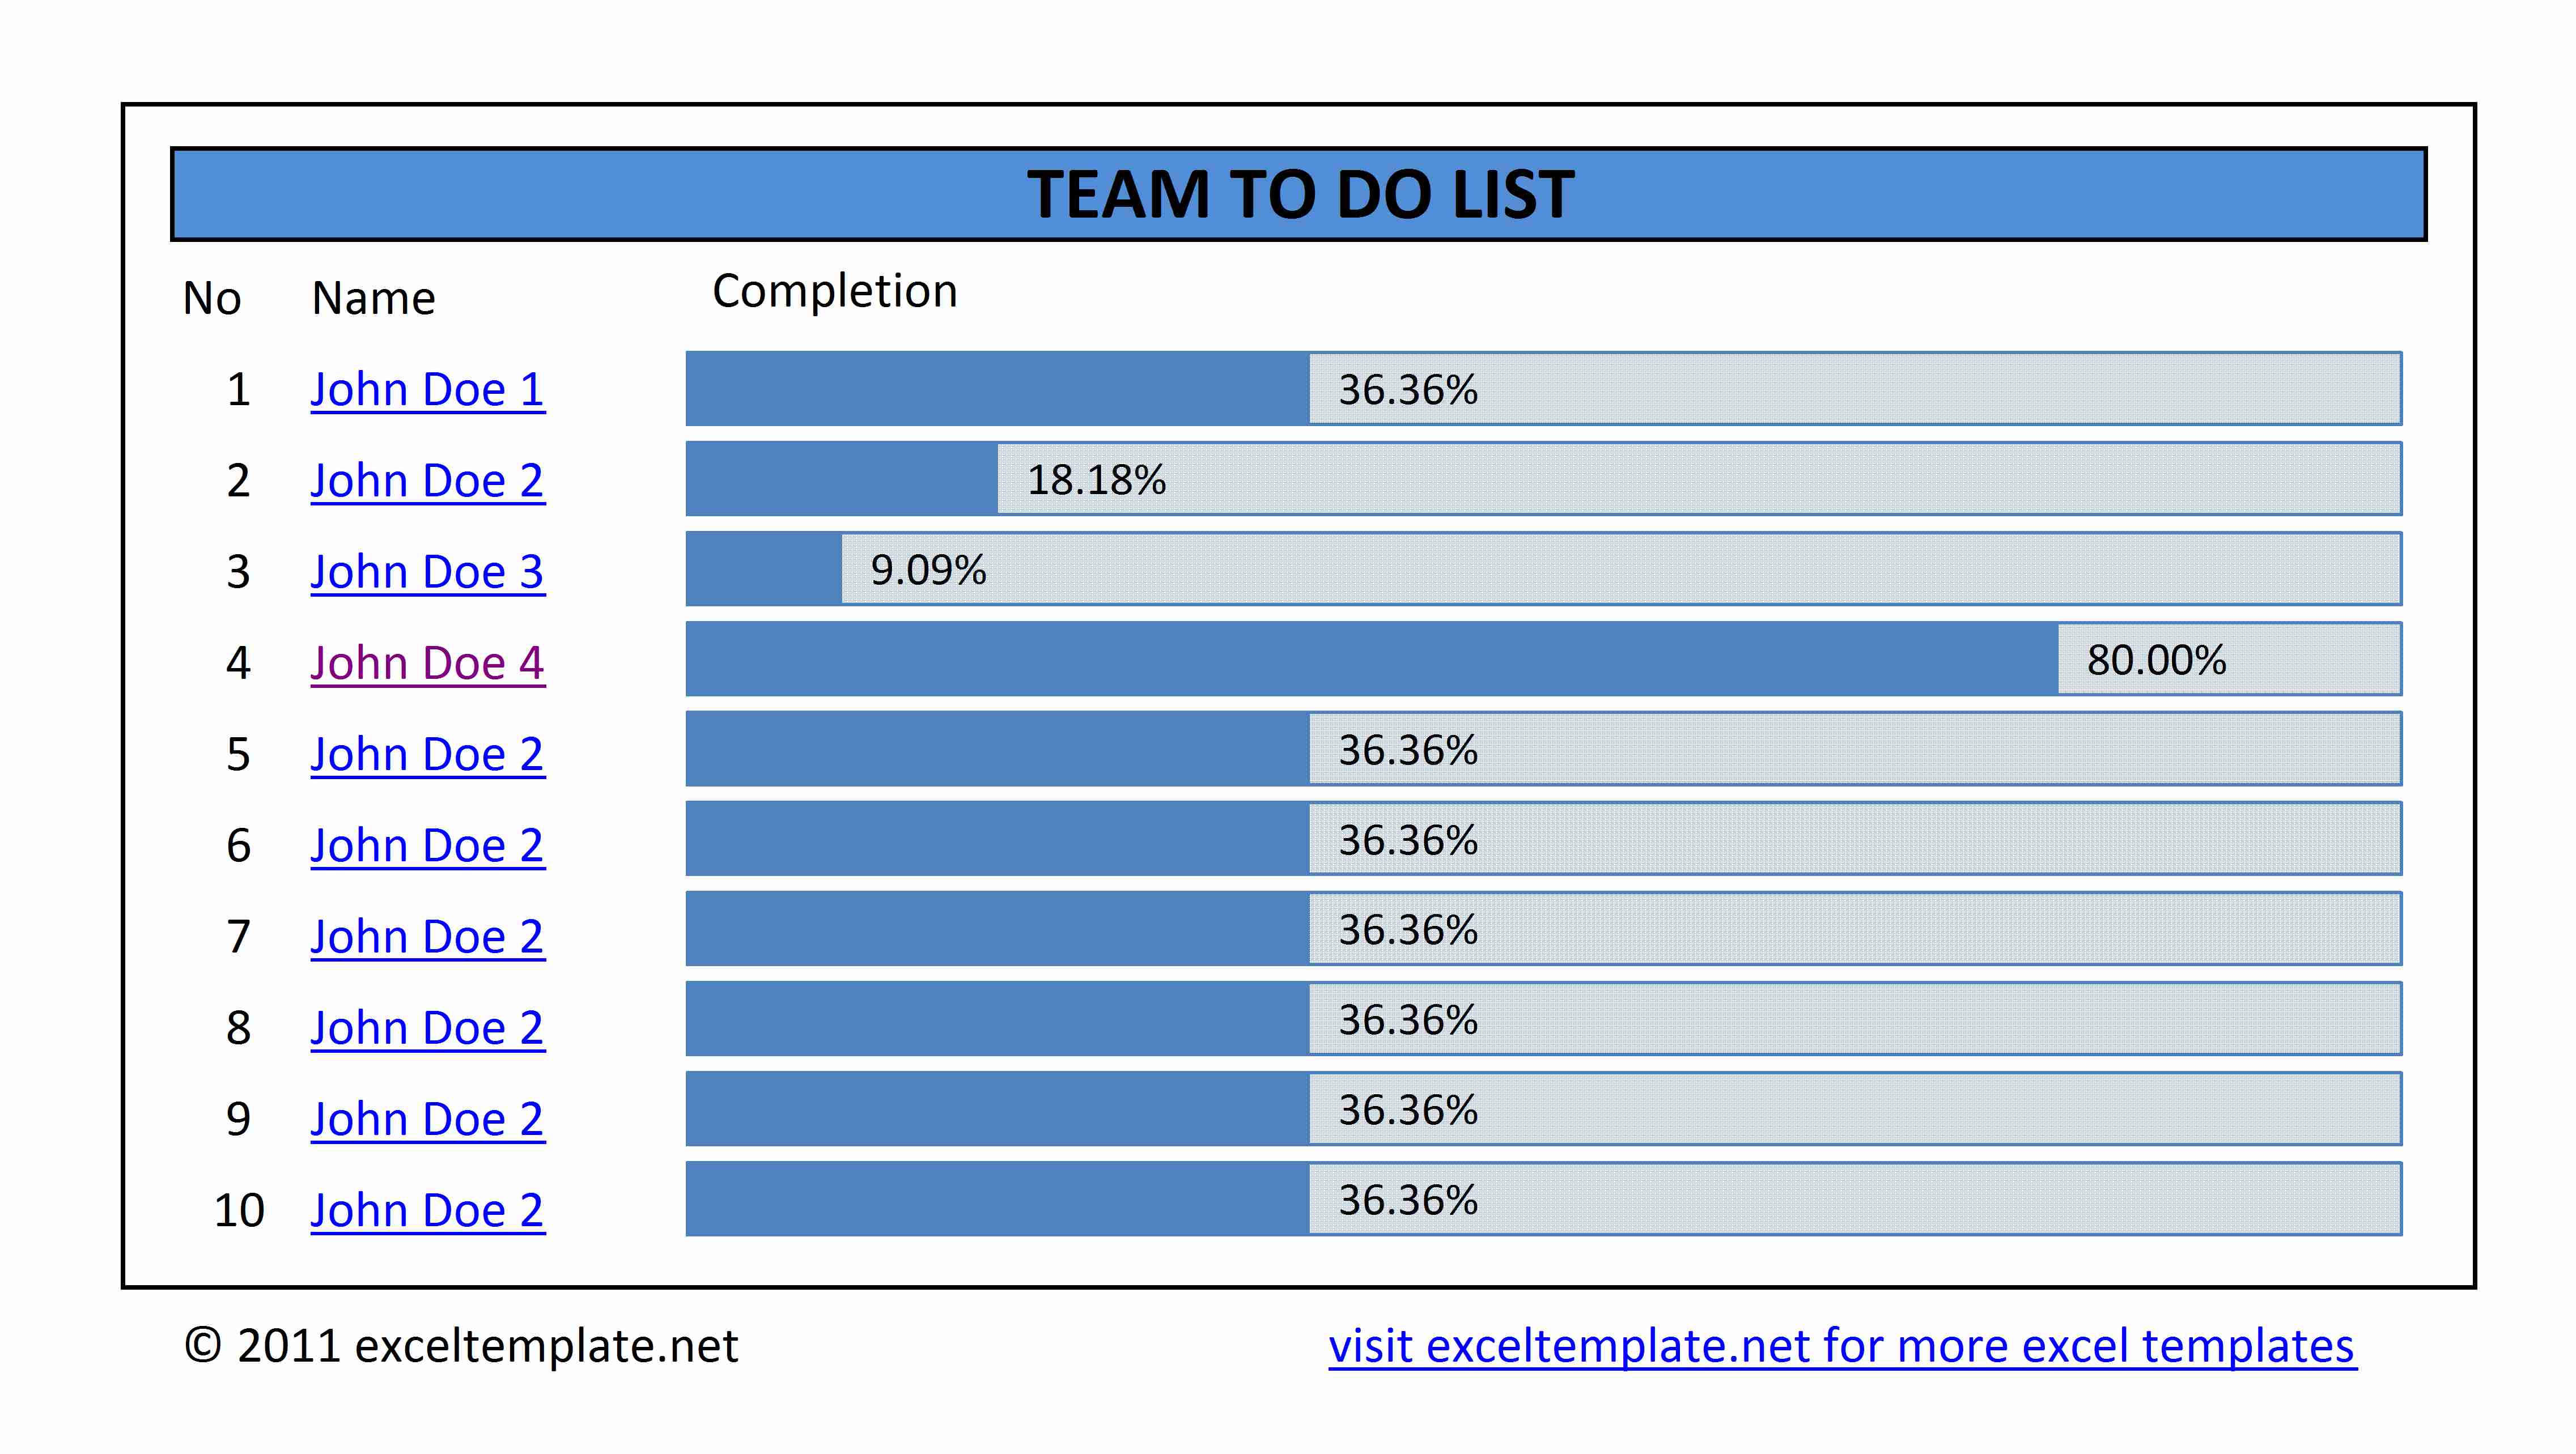 team-to-do-list-excel-templates